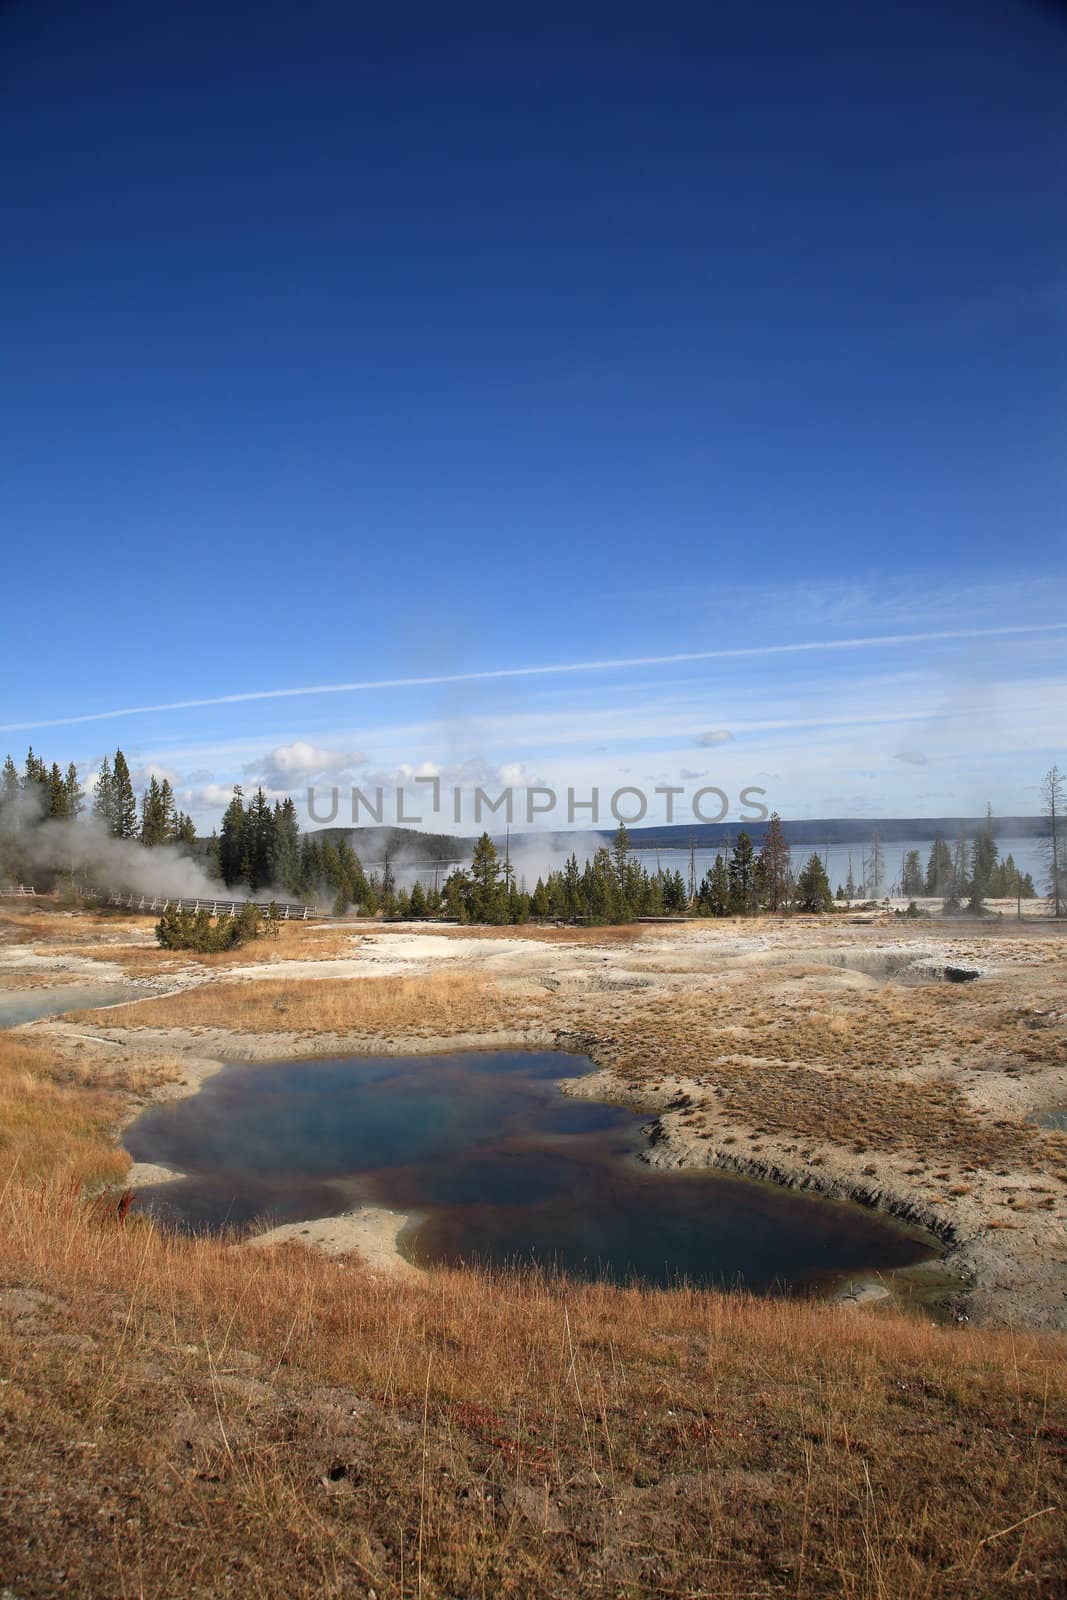 Yellowstone - West Thumb Geyser Basin by Ffooter